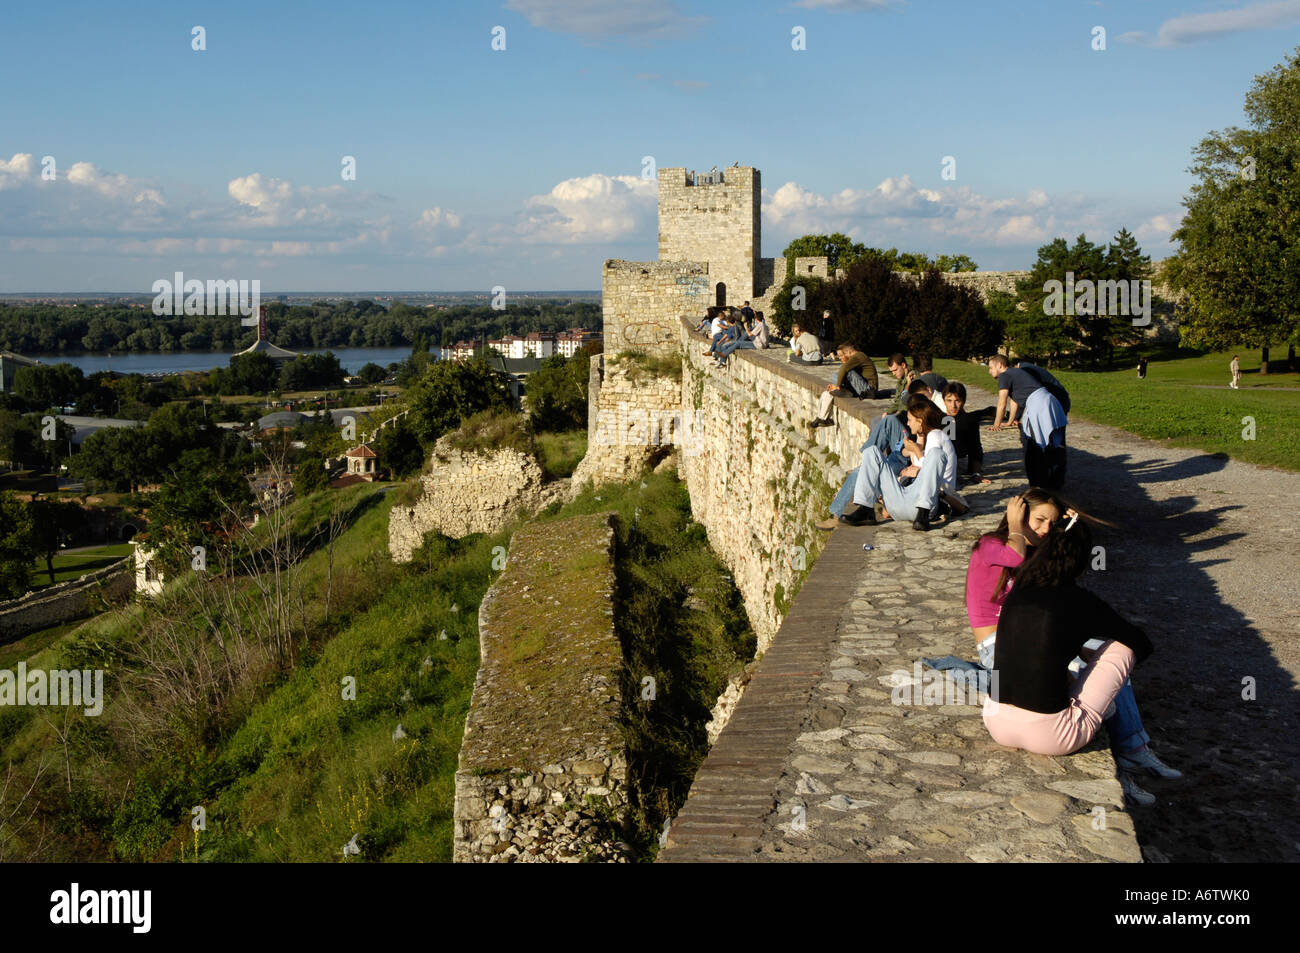 Beograd, fortress, city view Stock Photo